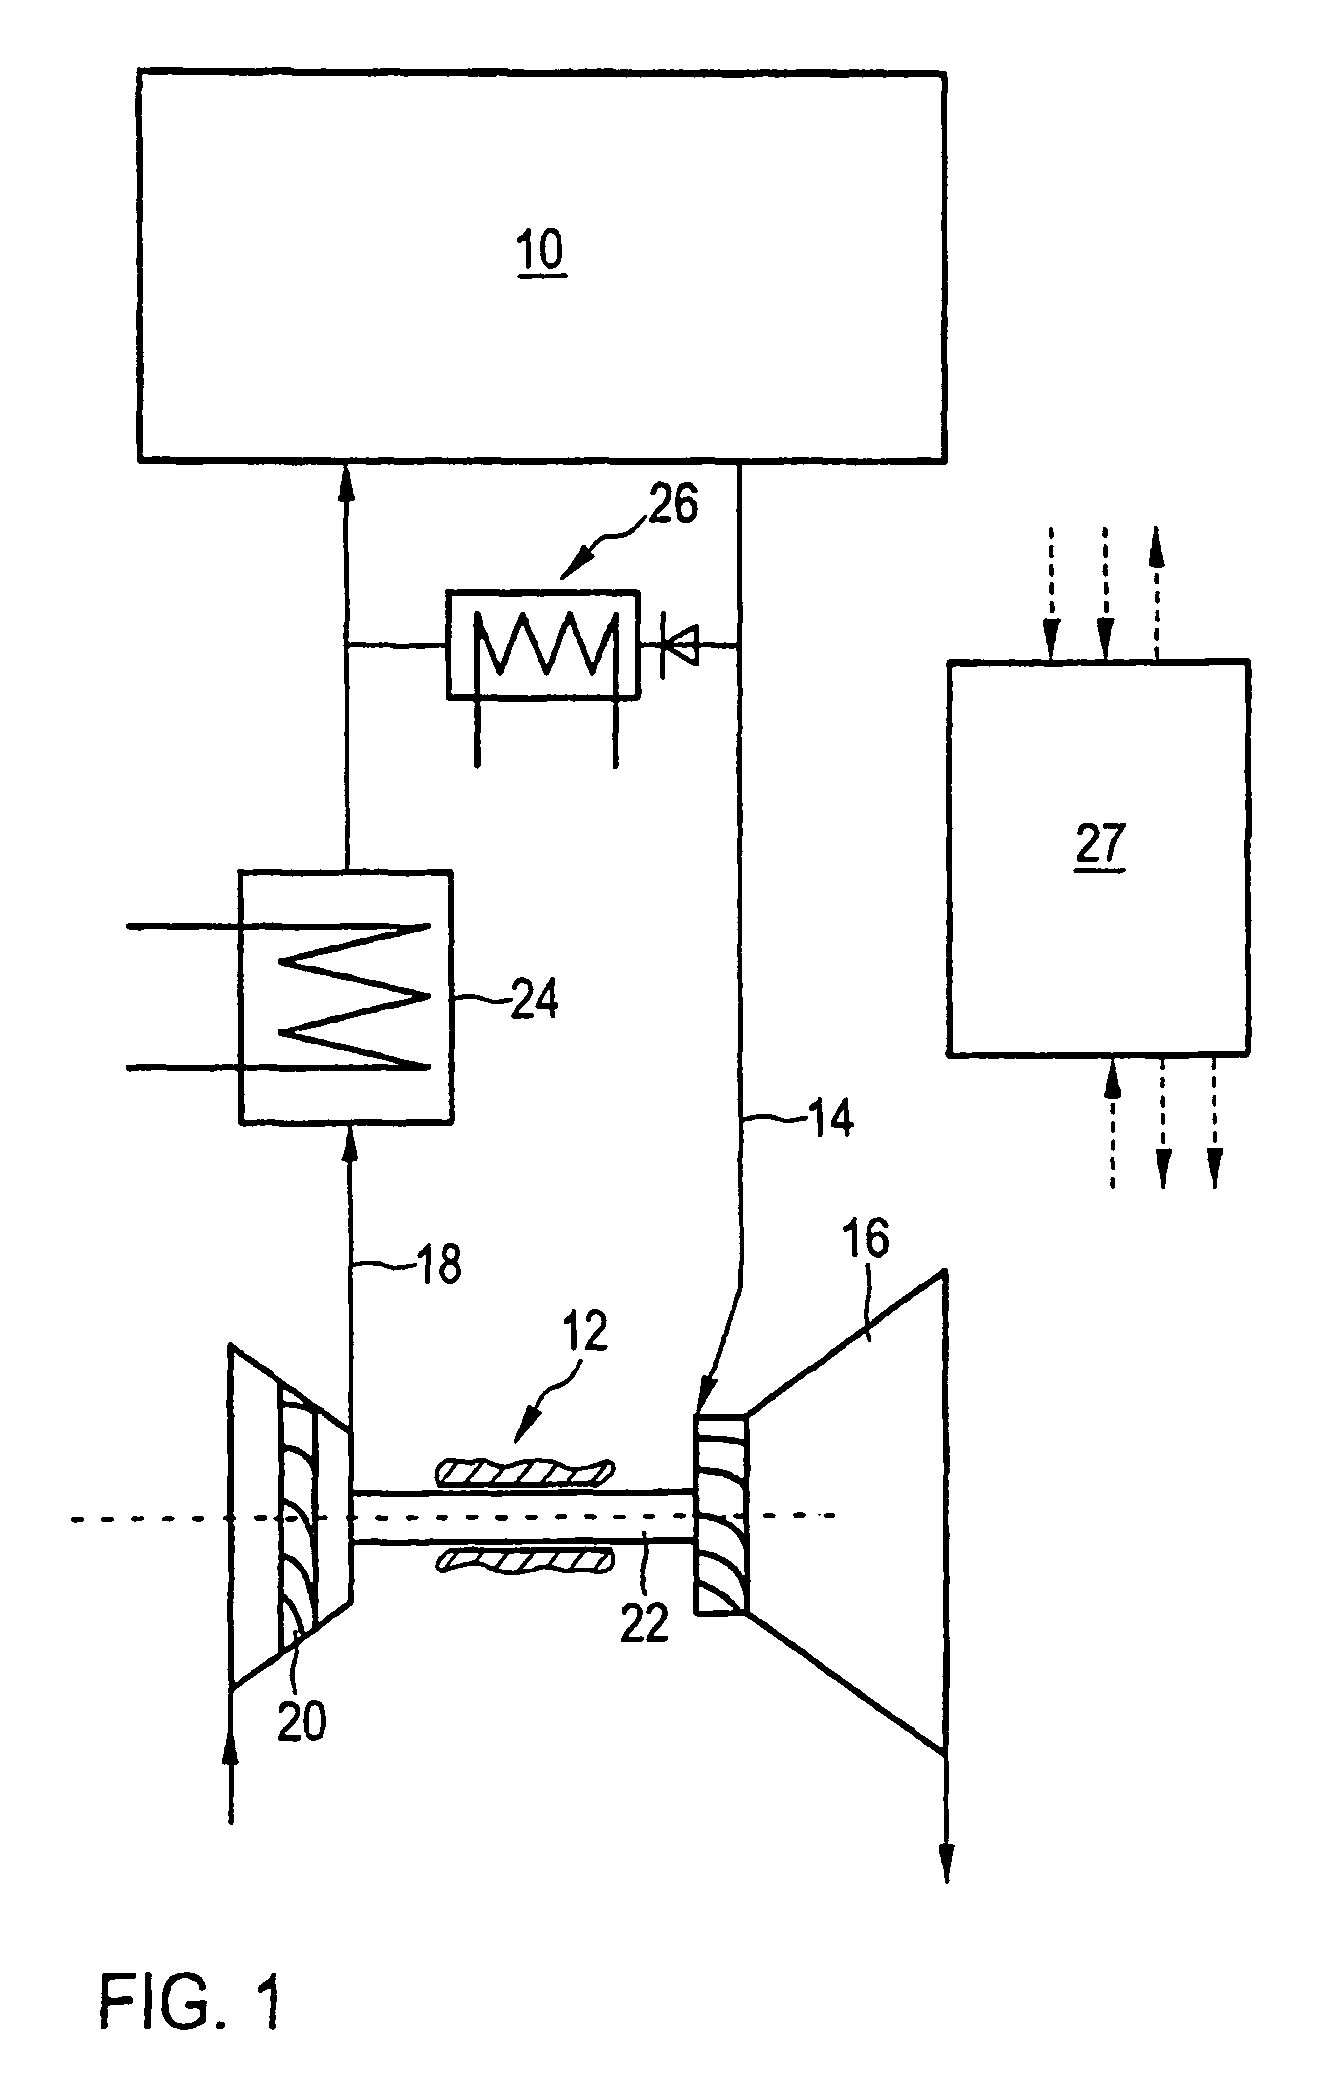 Exhaust-gas turbocharger for an internal combustion engine